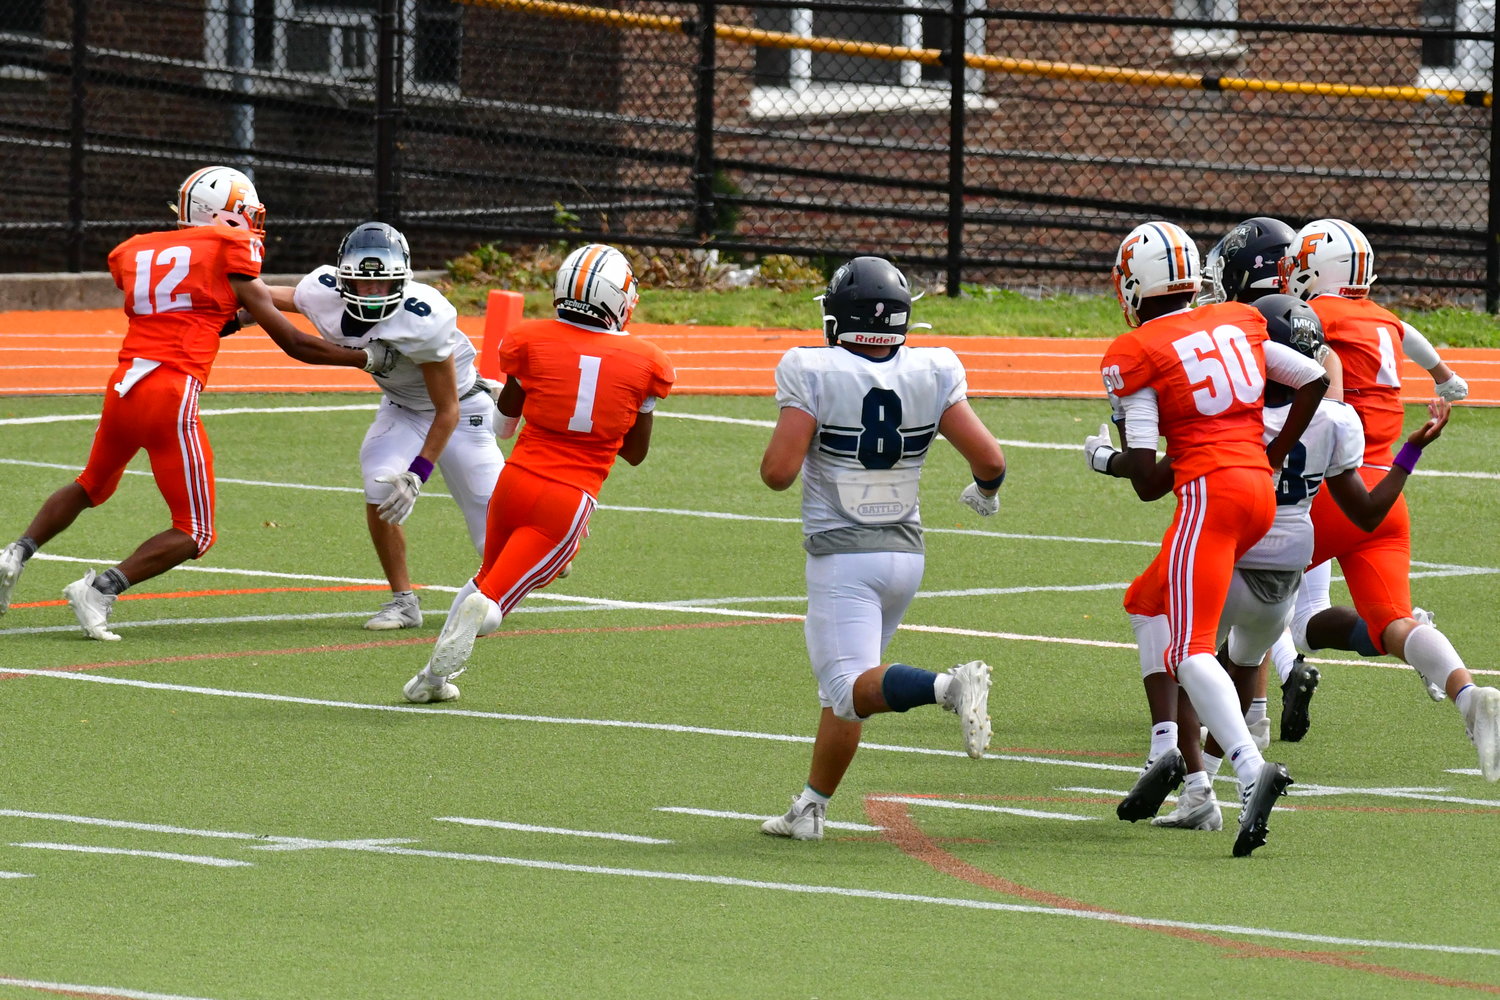 Fieldston Eagles senior Jaden Mena finds an open hole en route to a TD reception in Saturday’s 20-13 non-conference loss to Montclair Kimberley Academy.